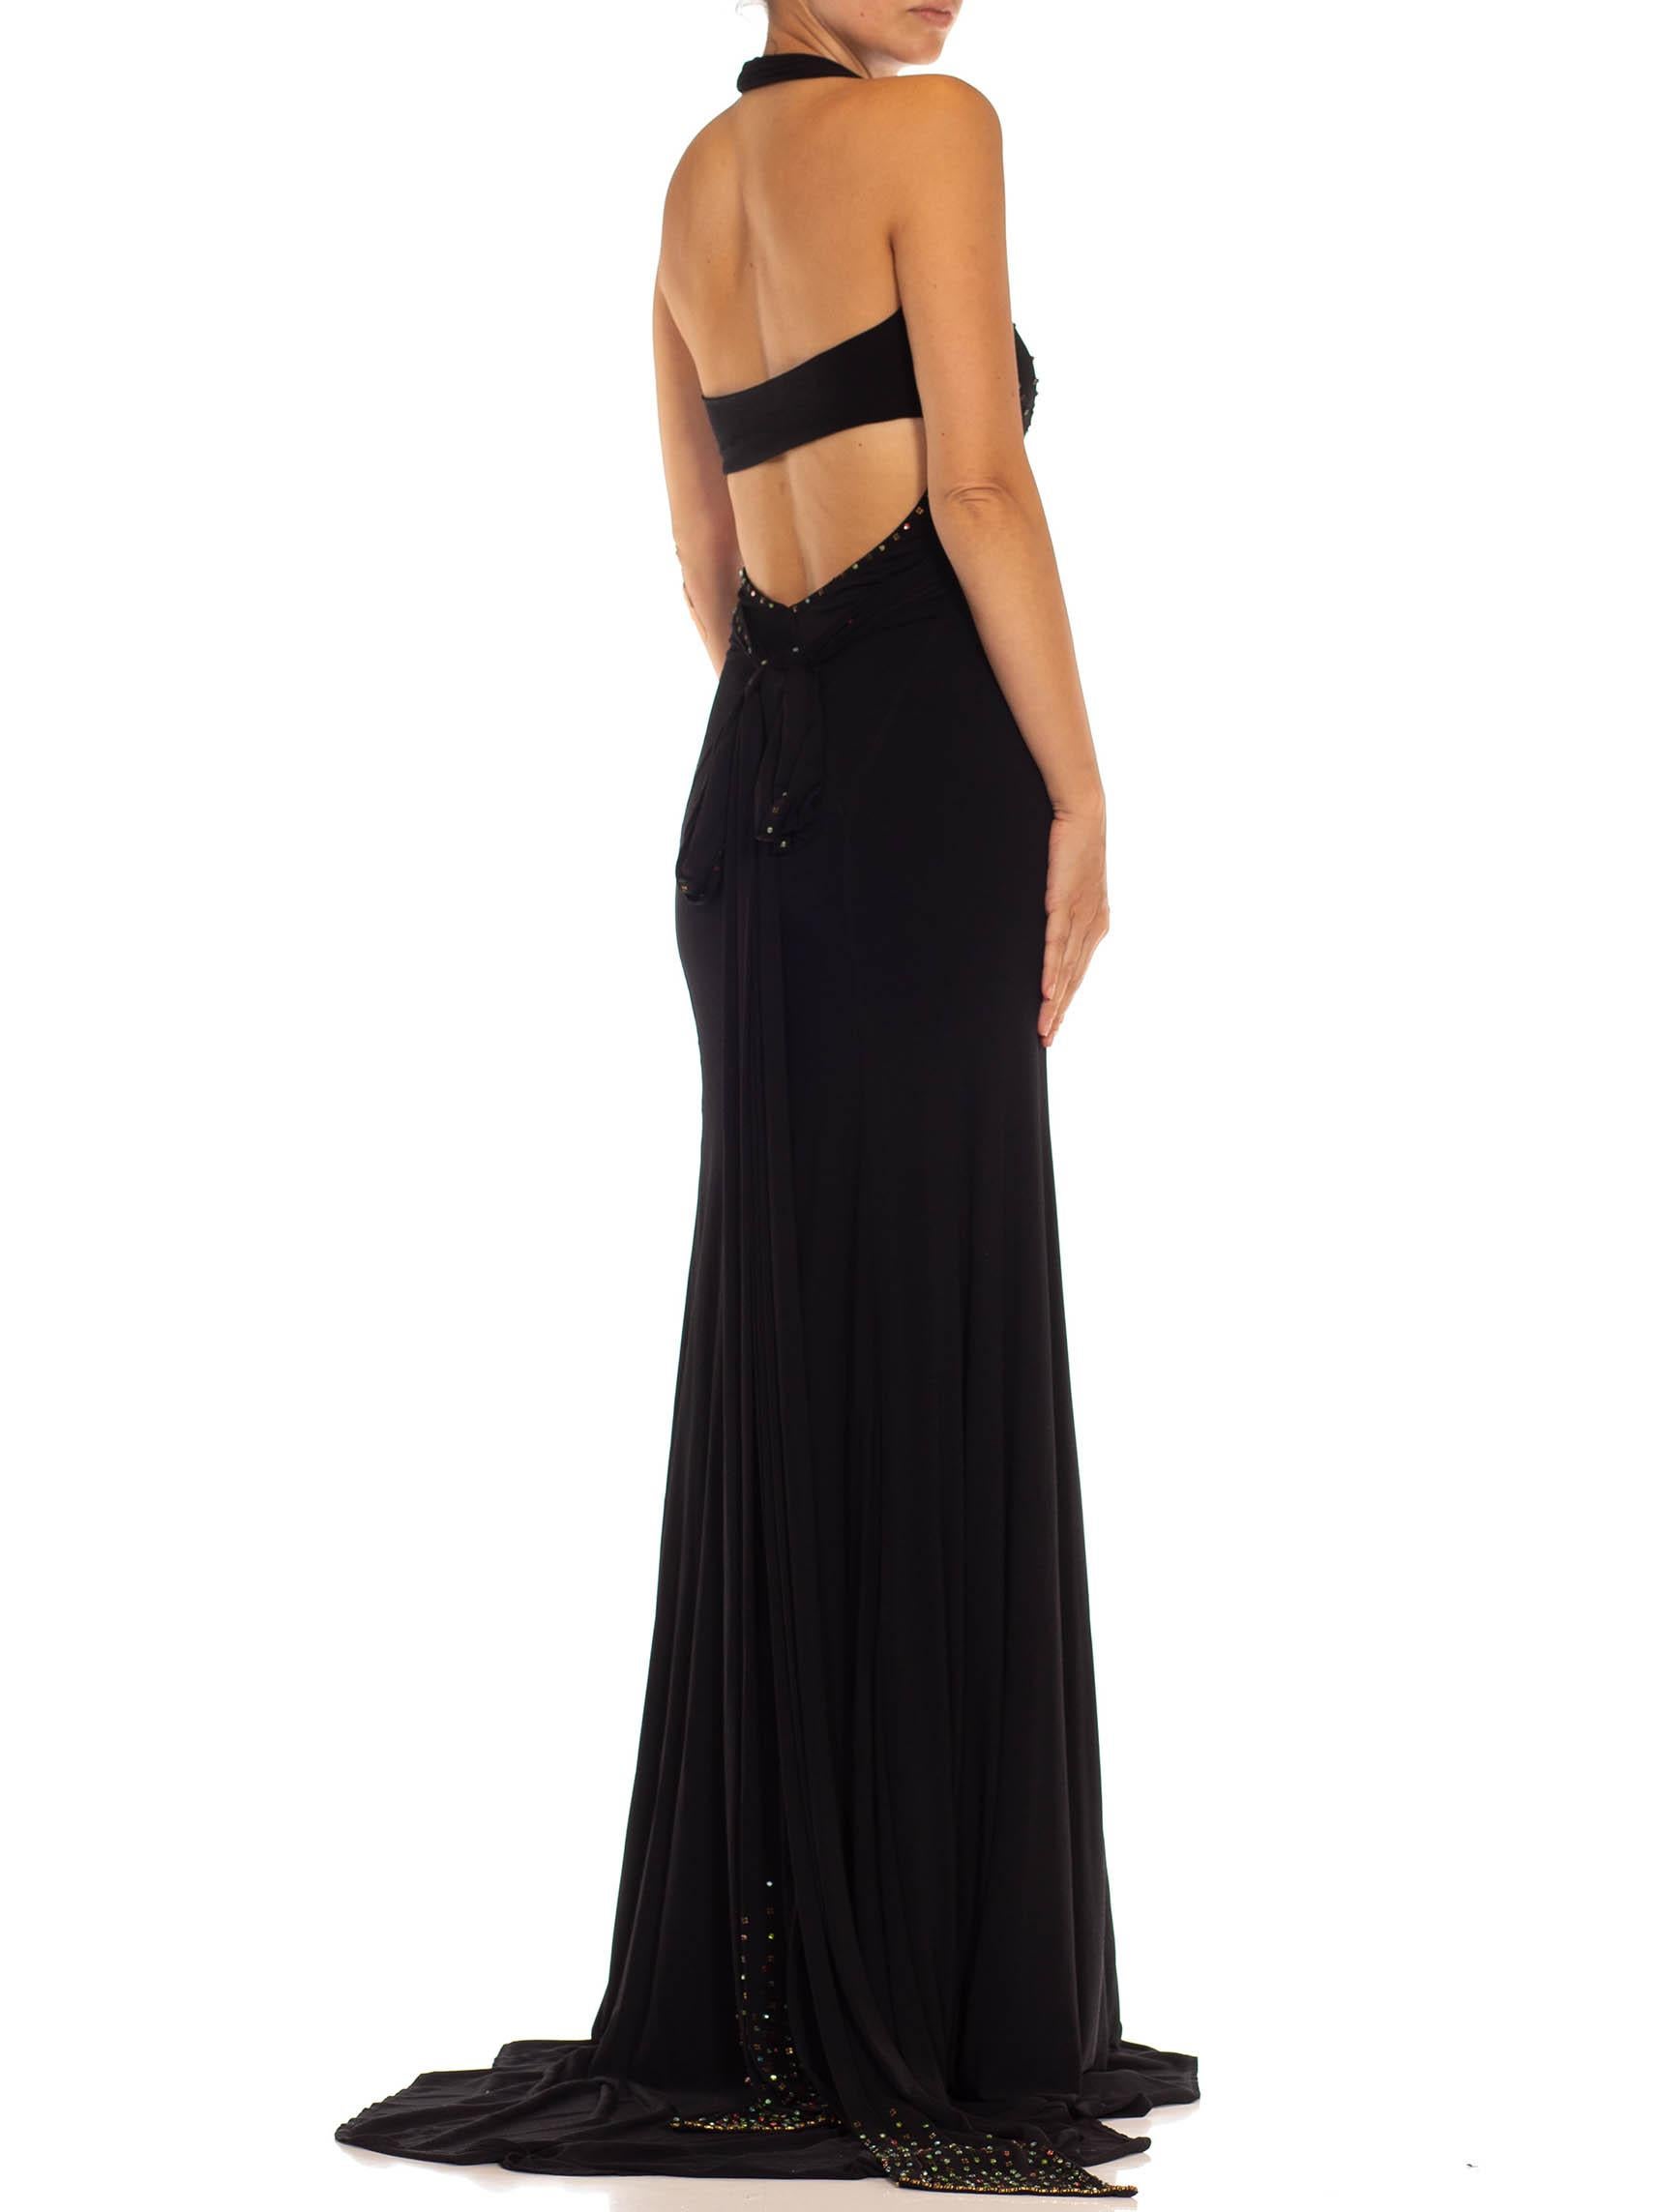 1990S Black Jersey Sexy Slinky Rhinestone Halter Neck Gown With Arm Sleeve Piece For Sale 6